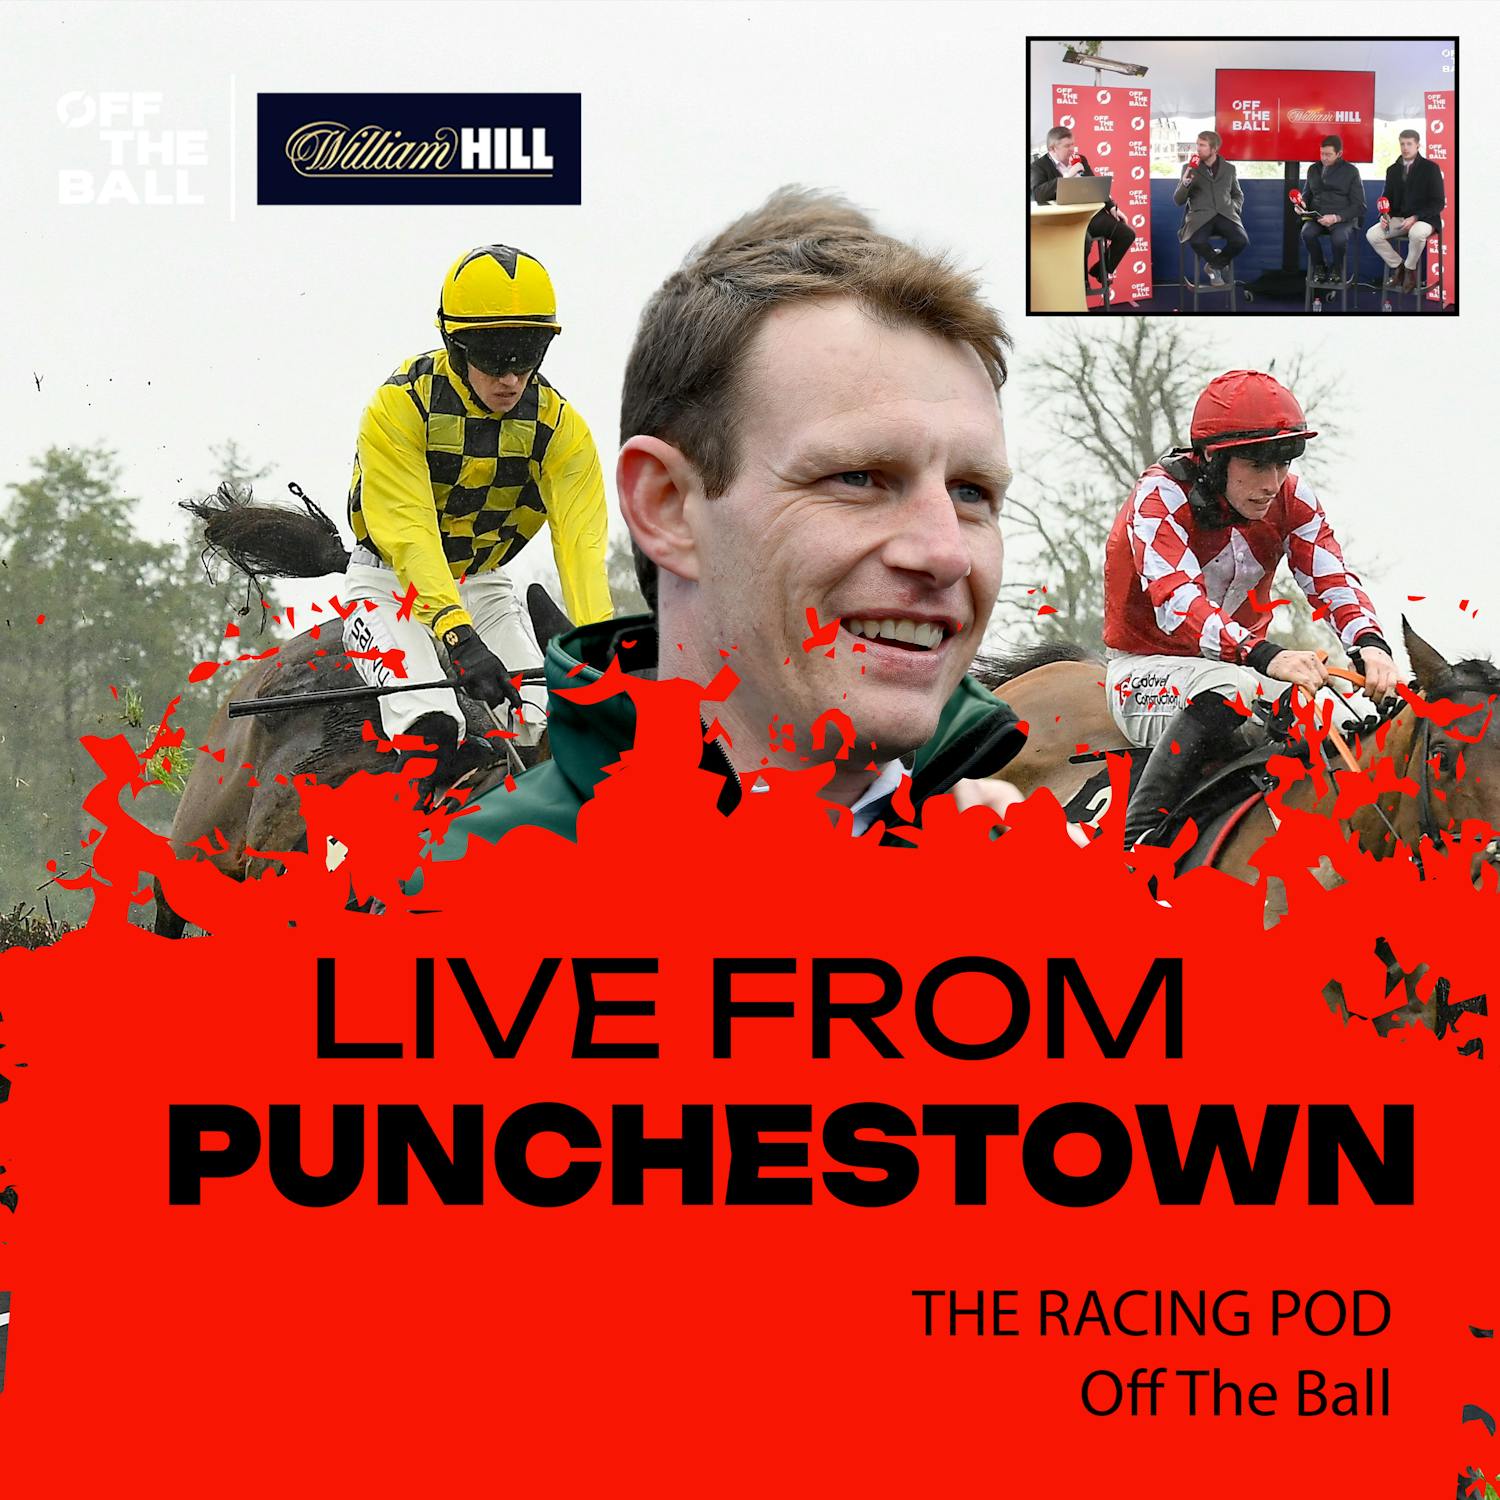 LIVE from PUNCHESTOWN | Champion Chase Tuesday, Willie Mullins’ dominance & memories from the track!